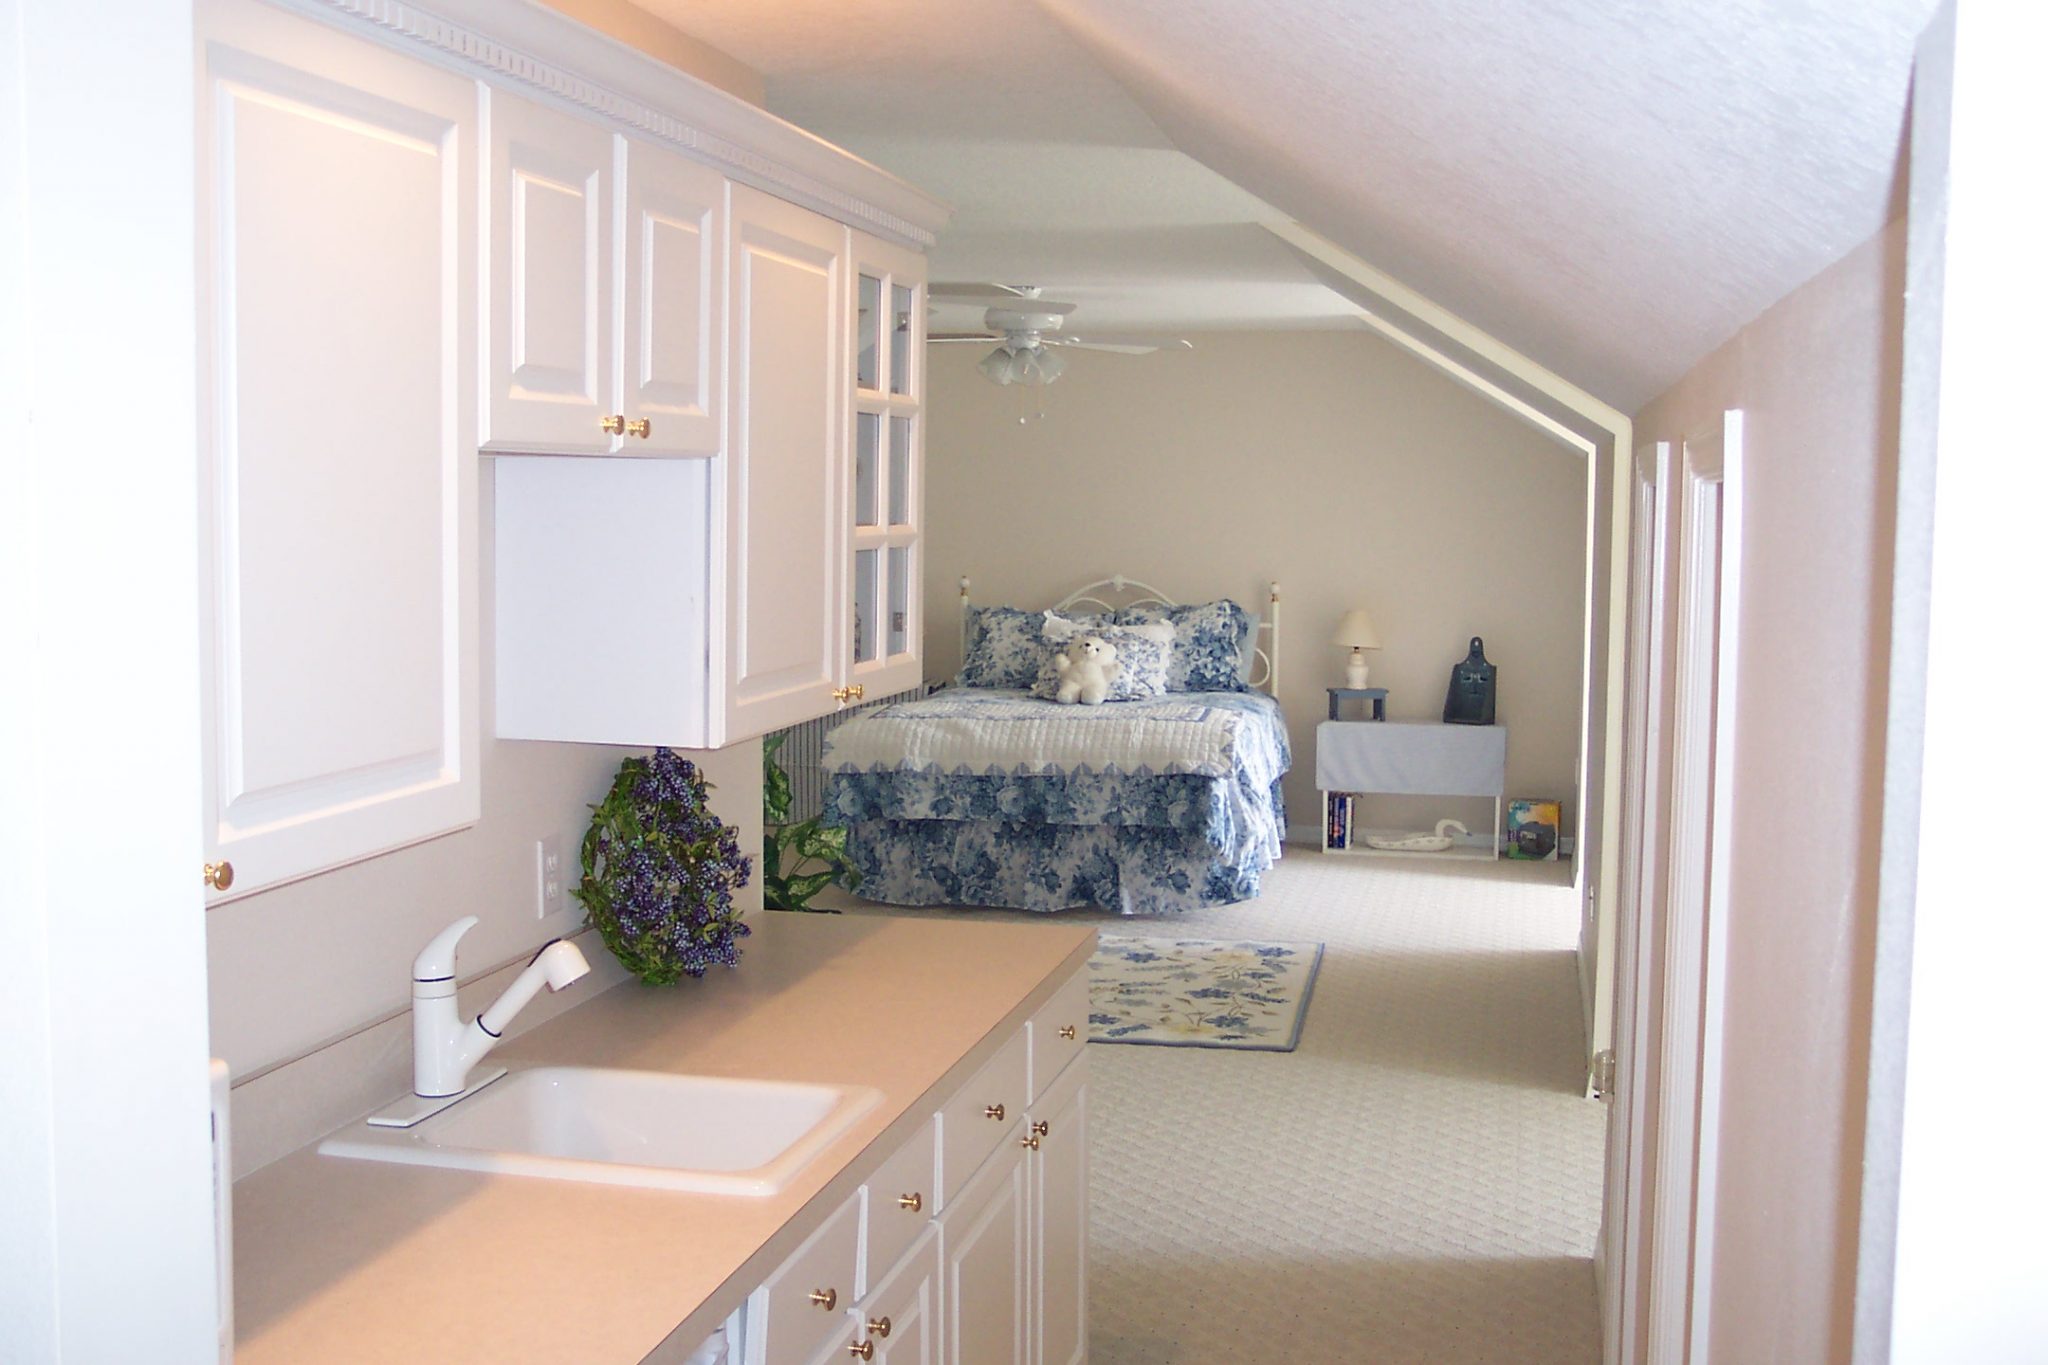 View of Windsor studio showing spacious kitchenette.  View more pictures in "Tour a Smart Home" link